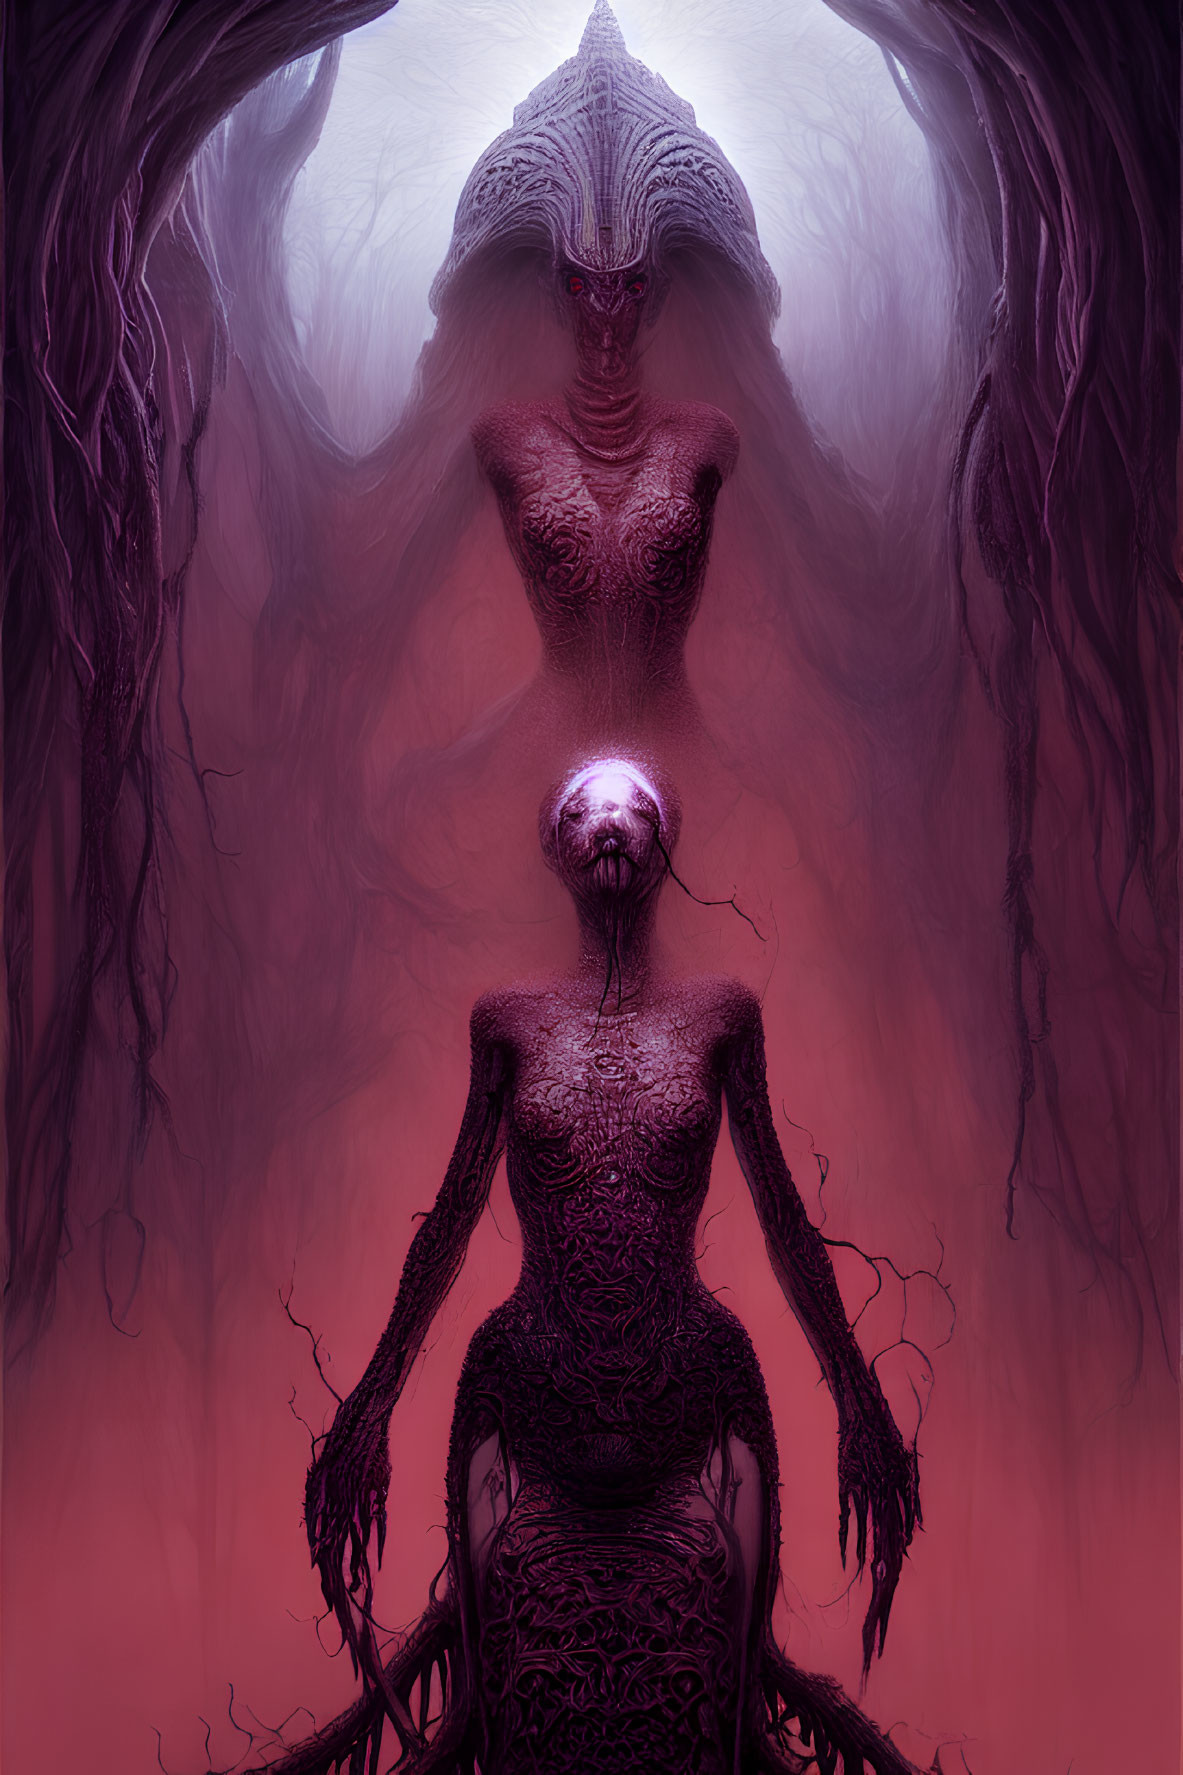 Mystical purple environment with humanoid figures and intricate textures